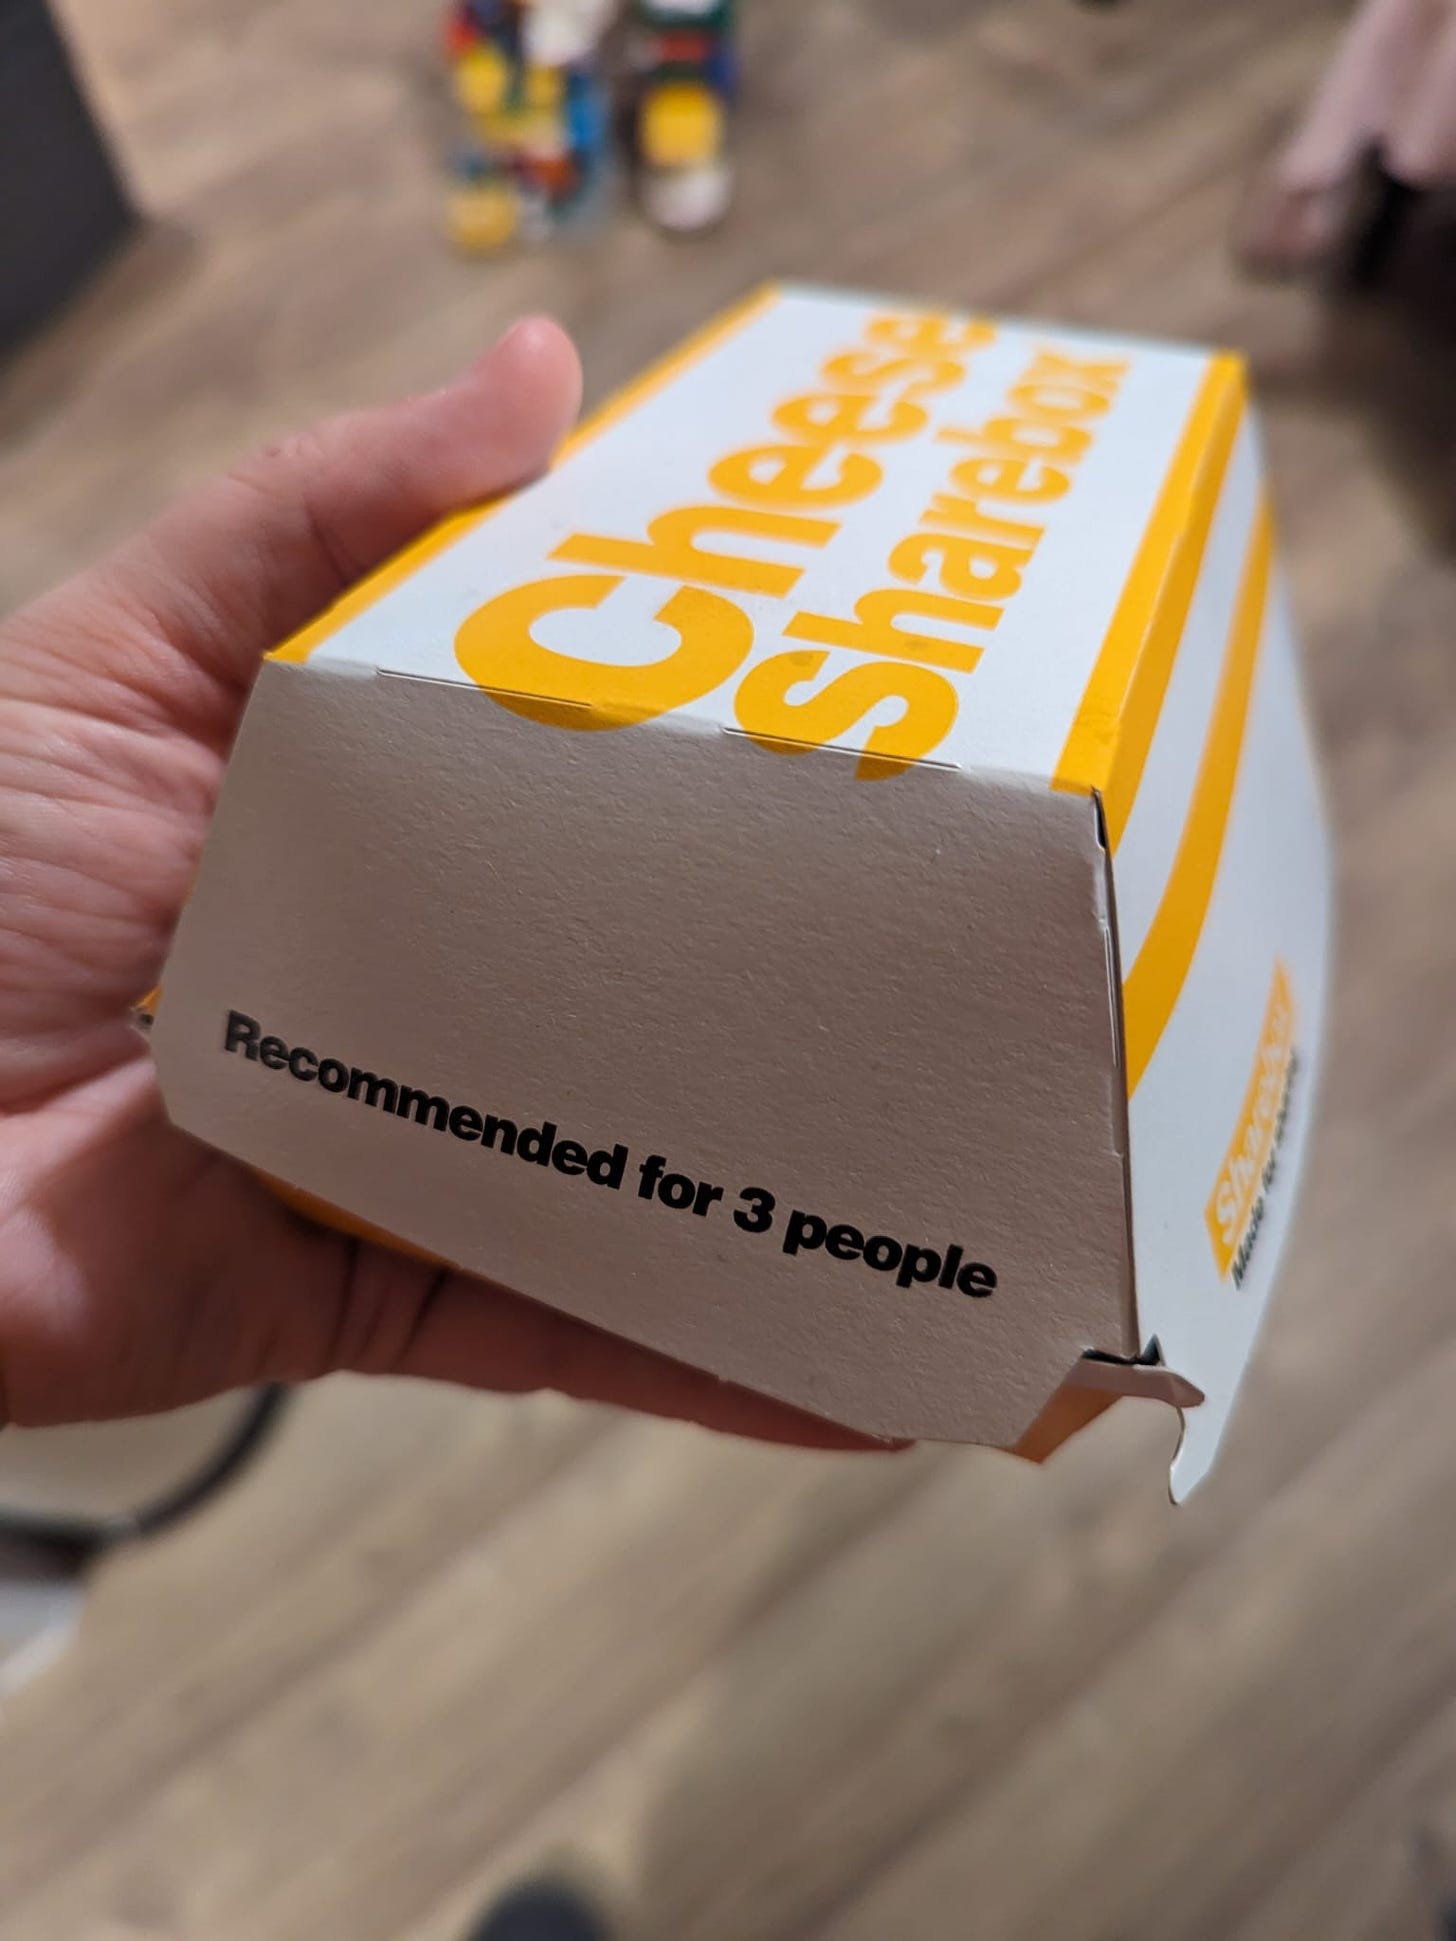 A Cheese Sharebox from McDonalds that erroneously states it's suitable for 3 people to share